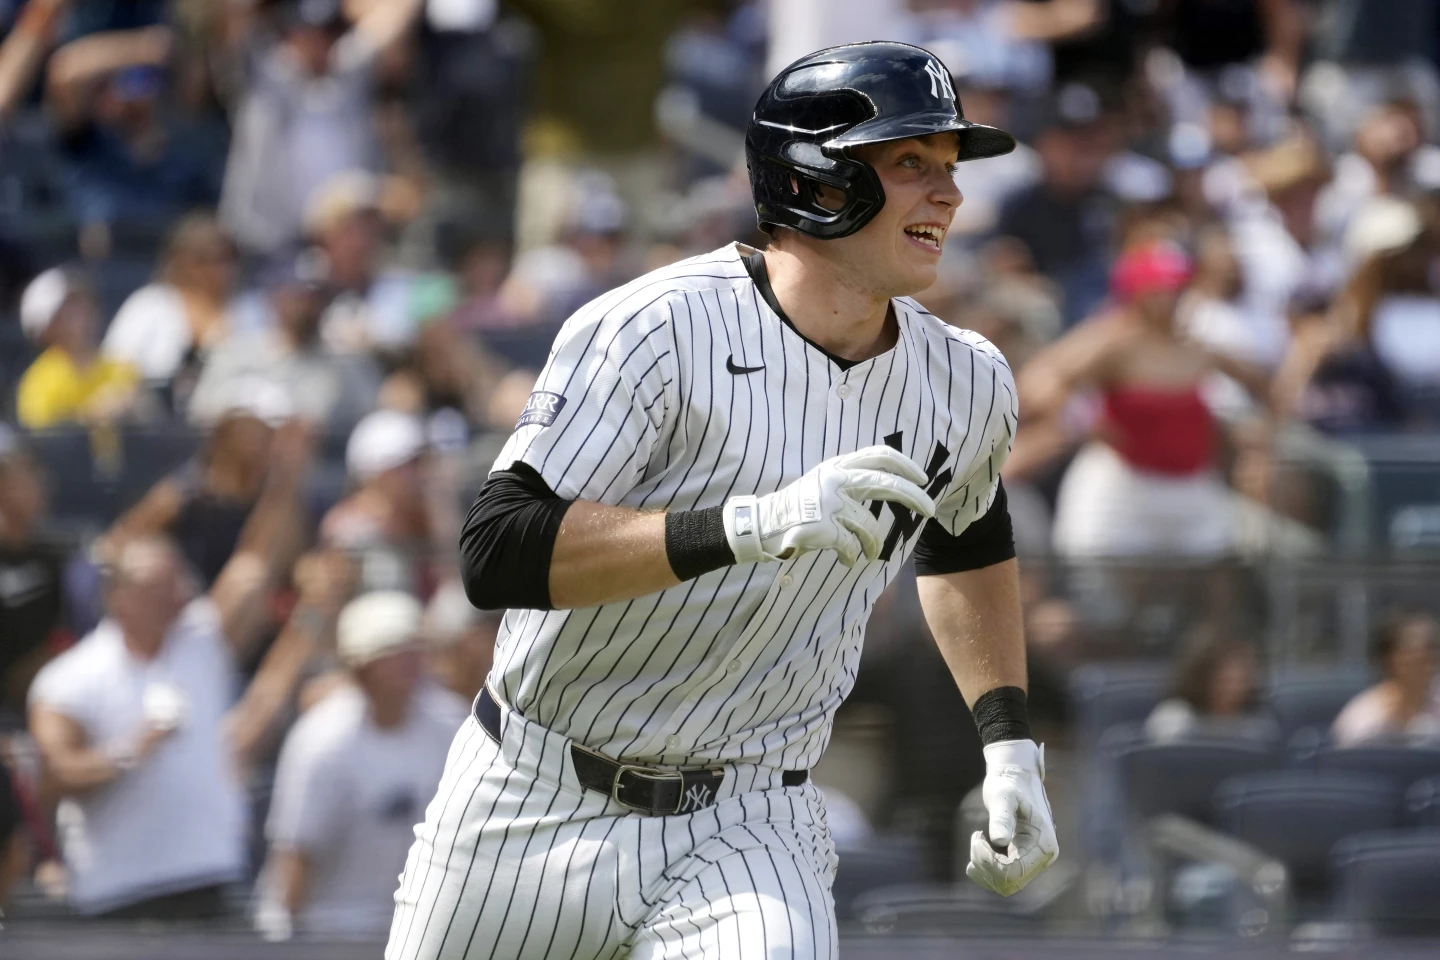 Ben Rice of the New York Yankees runs to the first base after hitting a home run in the seventh inning of a game against the Boston Red Sox at Yankee Stadium in New York City, July 6, 2024. /AP